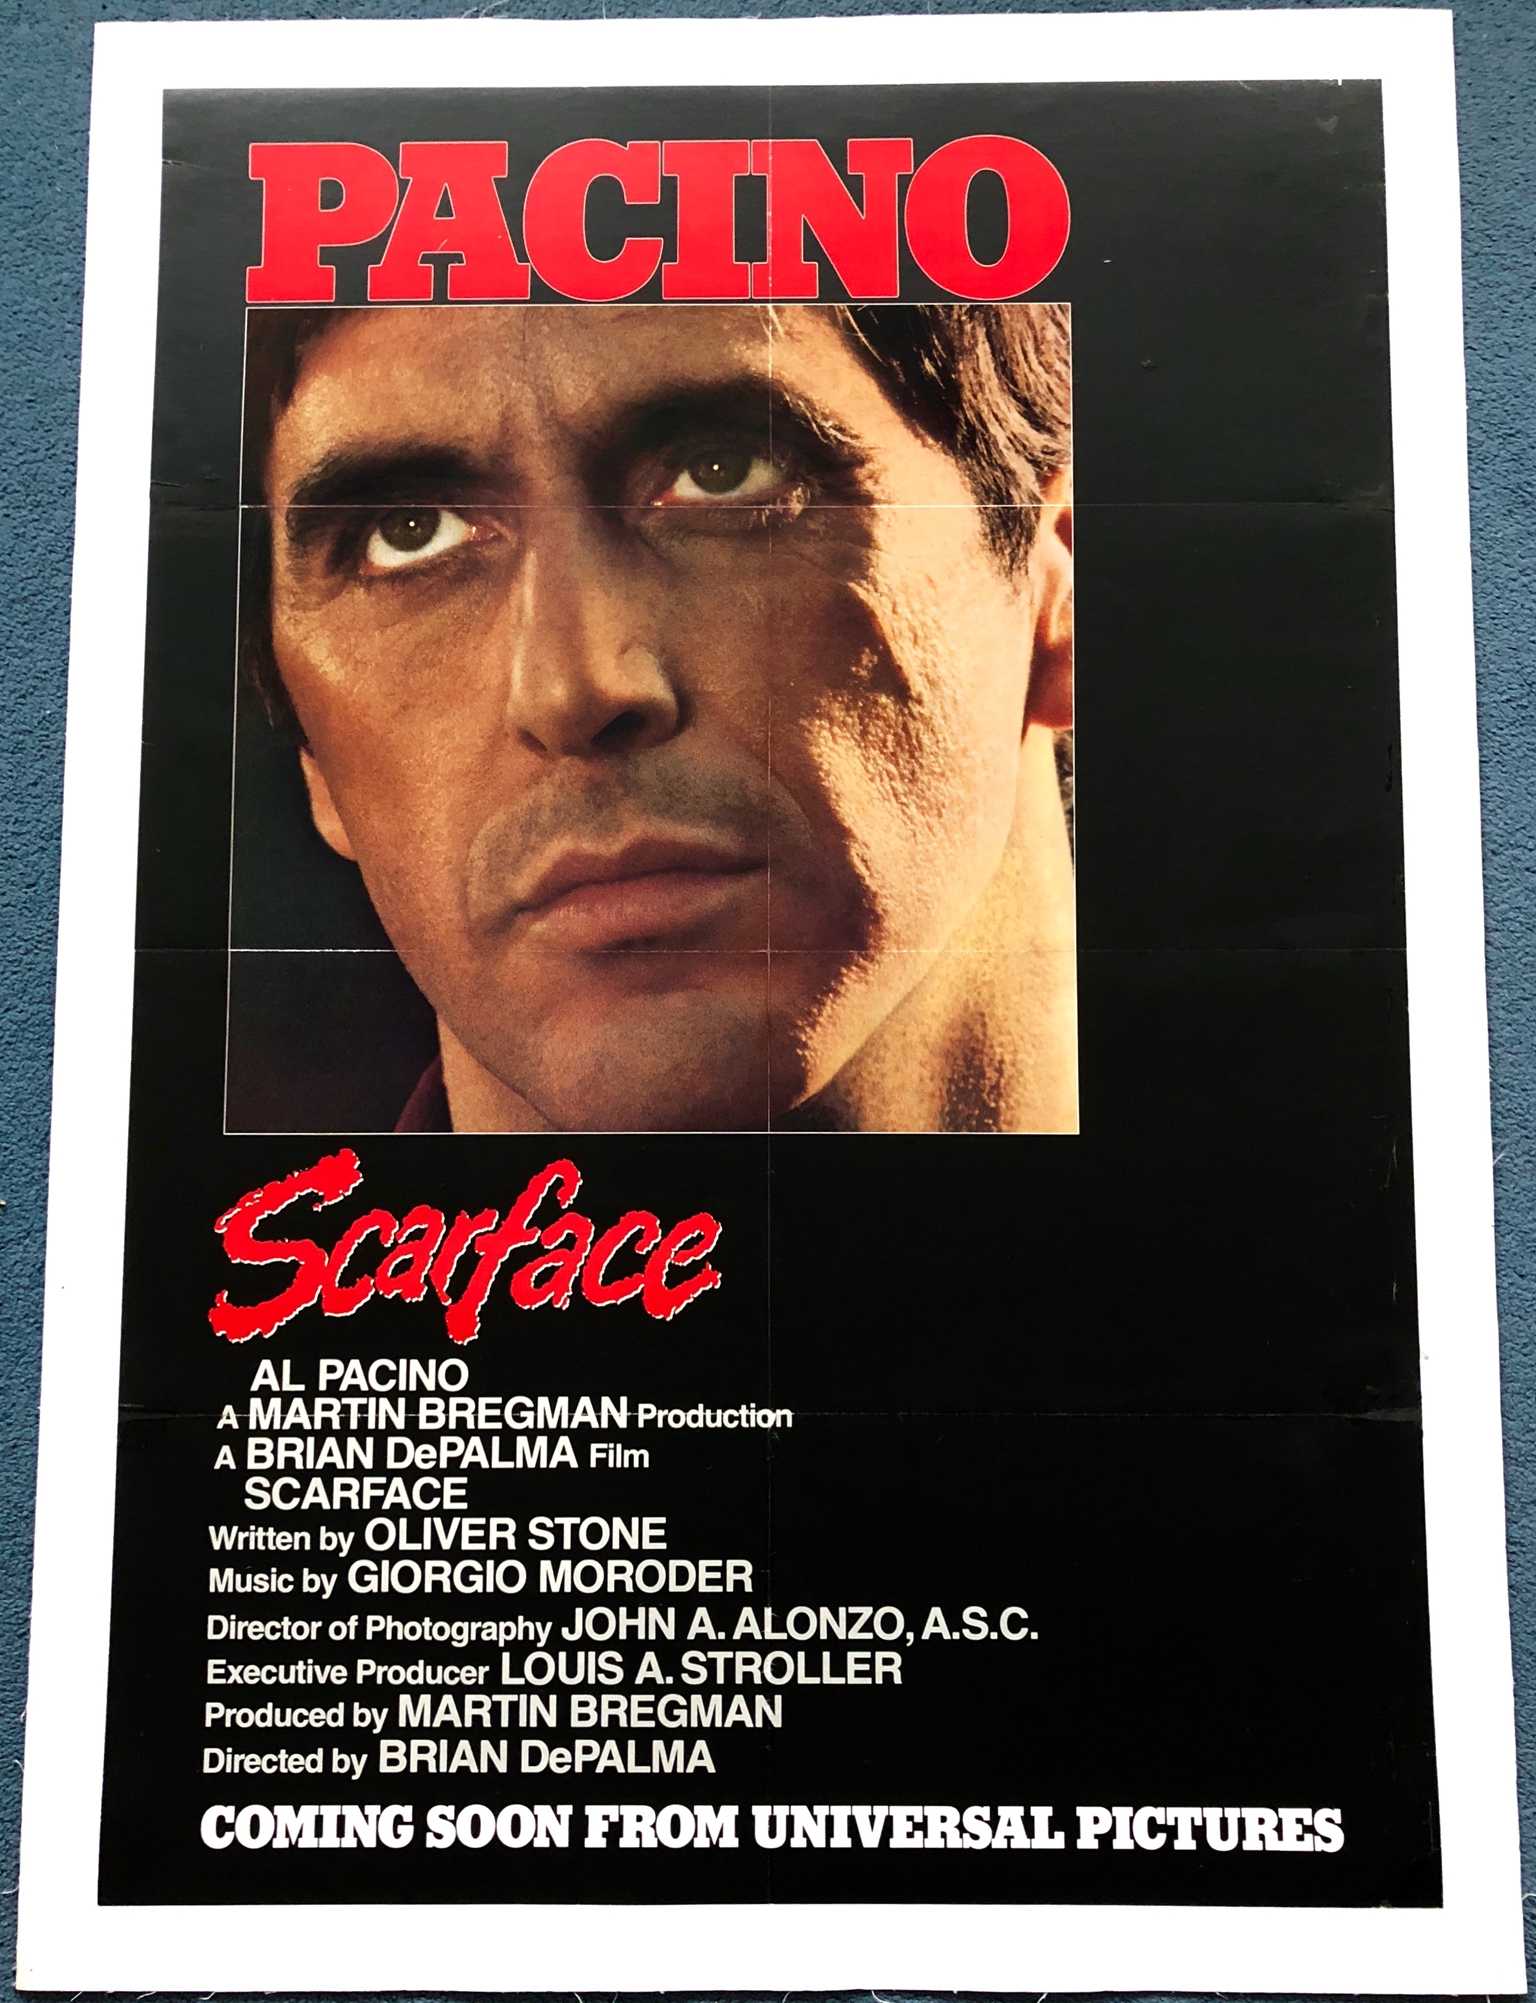 SCARFACE (1983) - US One Sheet Movie Poster - Al Pacino - Advance 'Coming Soon' - (27" x 41" - 68.